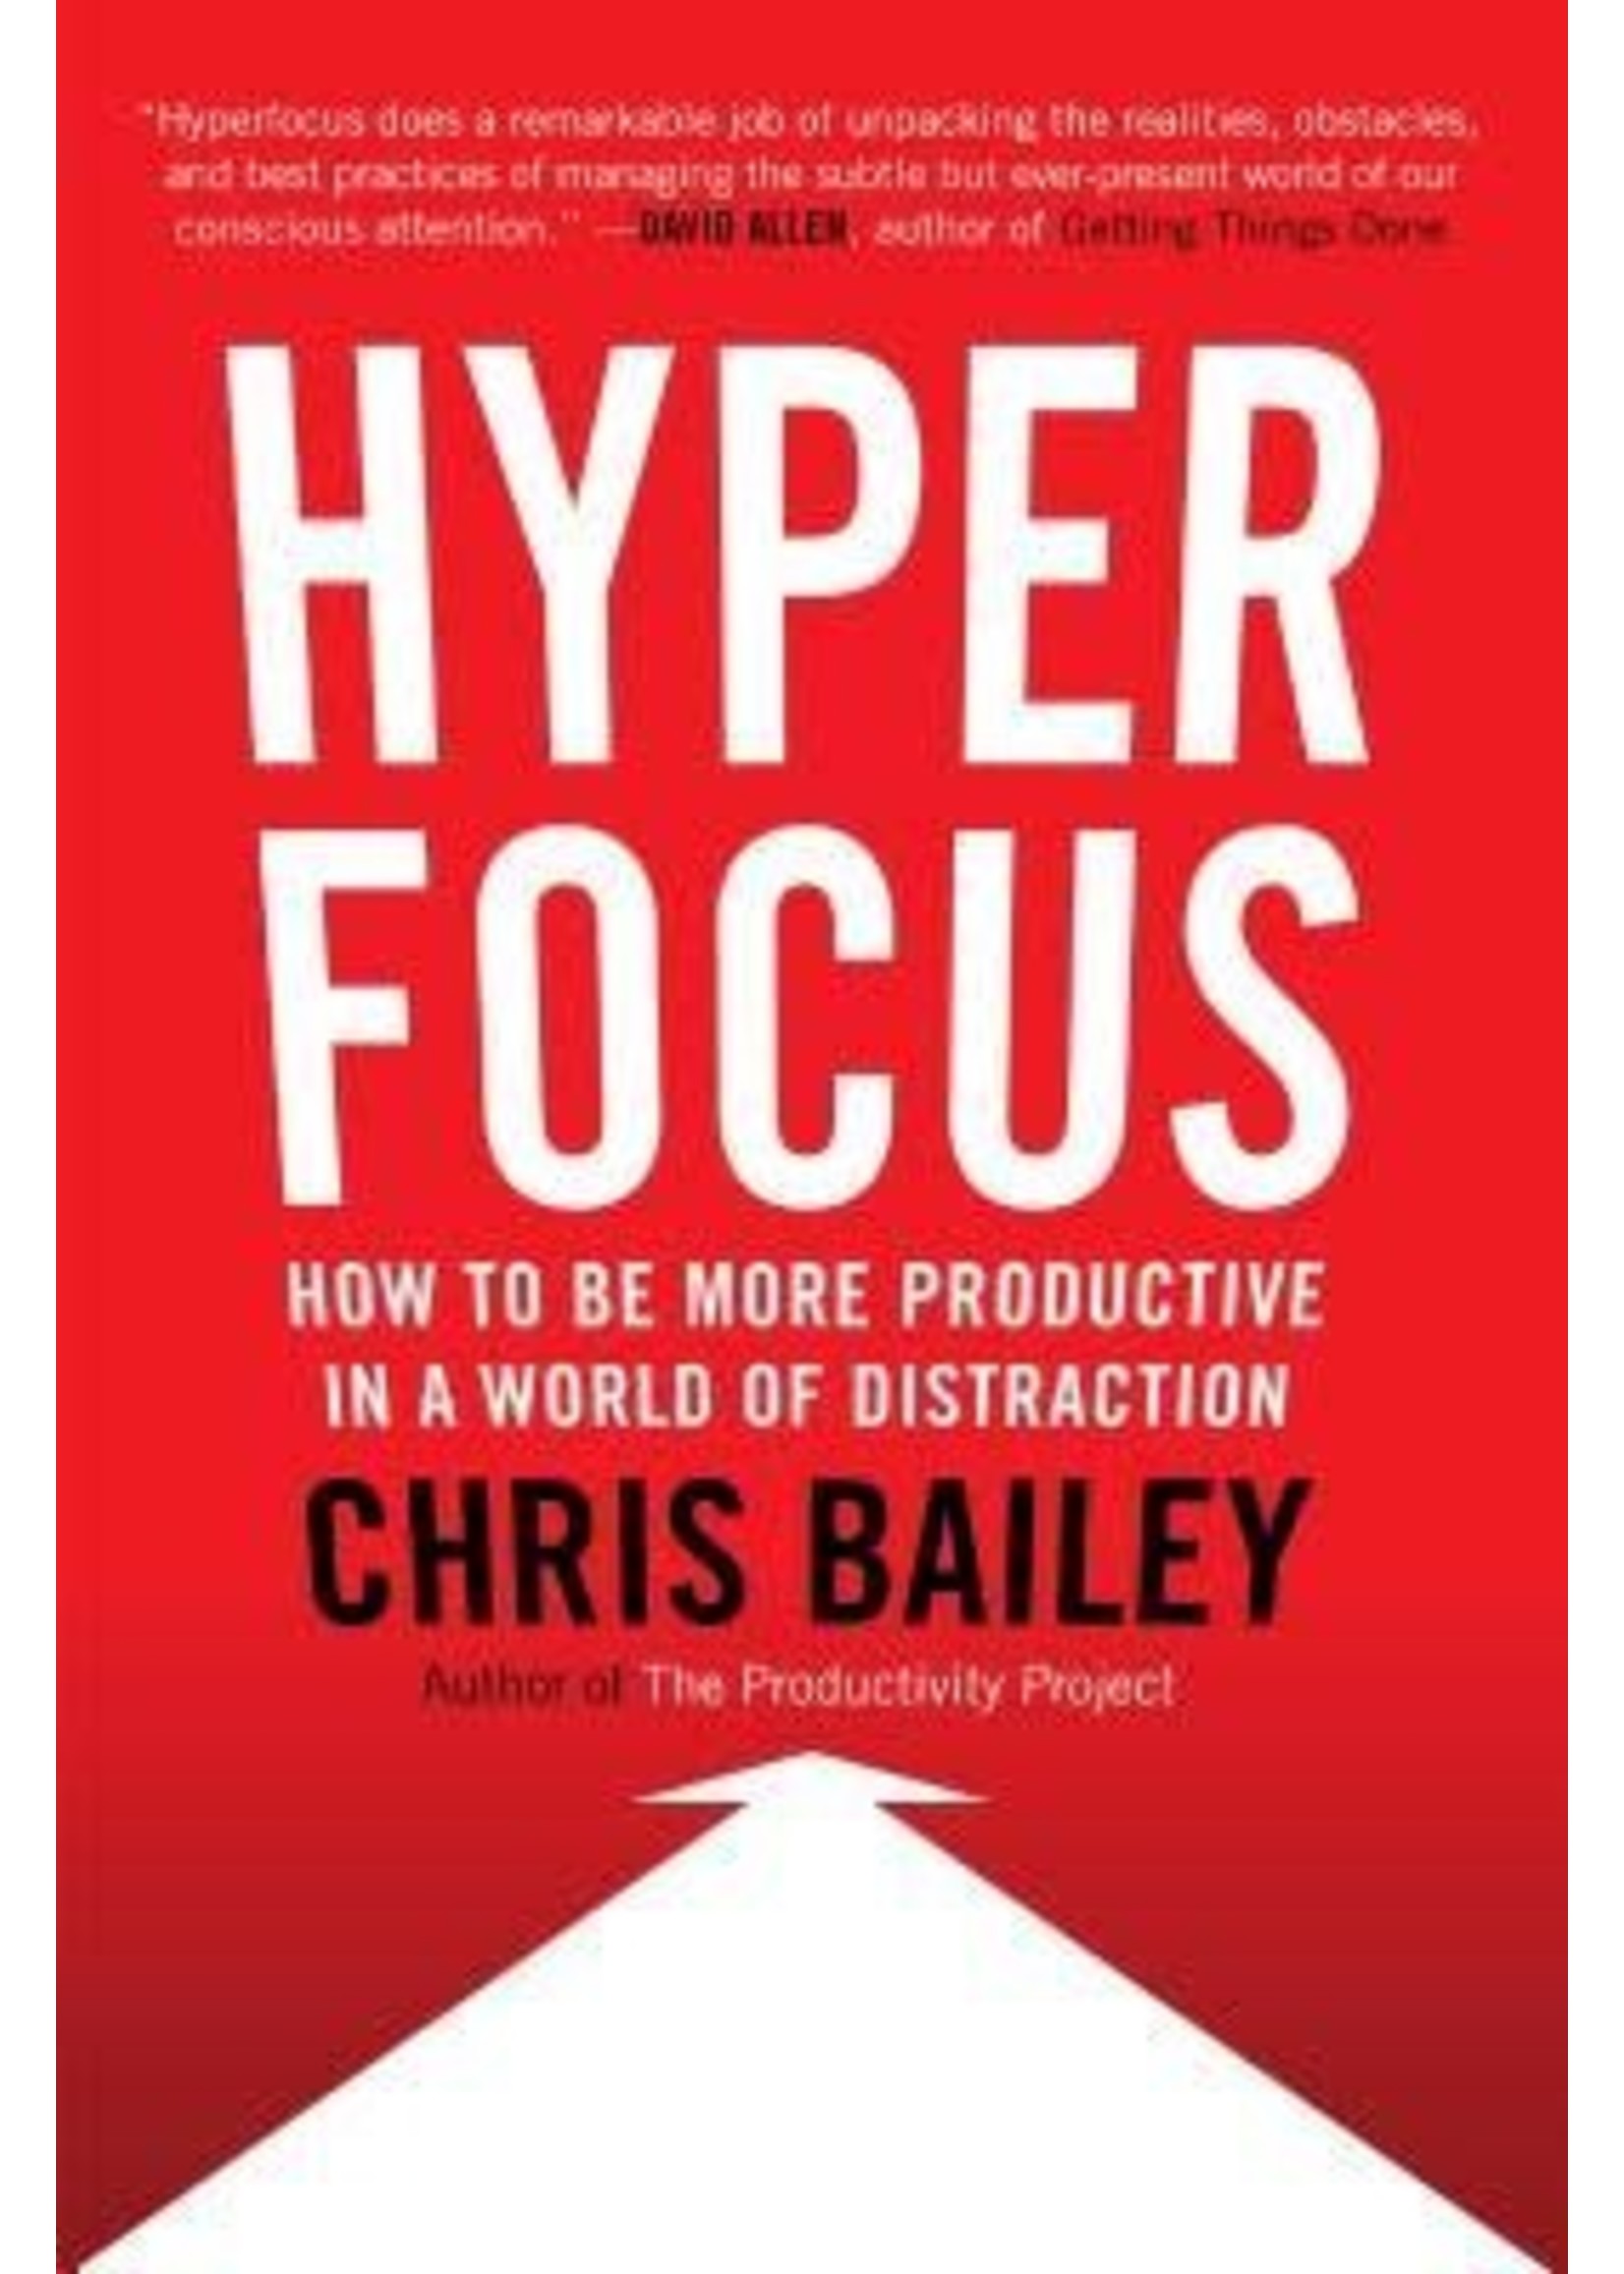 Hyperfocus: How to Manage Your Attention in a World of Distraction by Chris Bailey